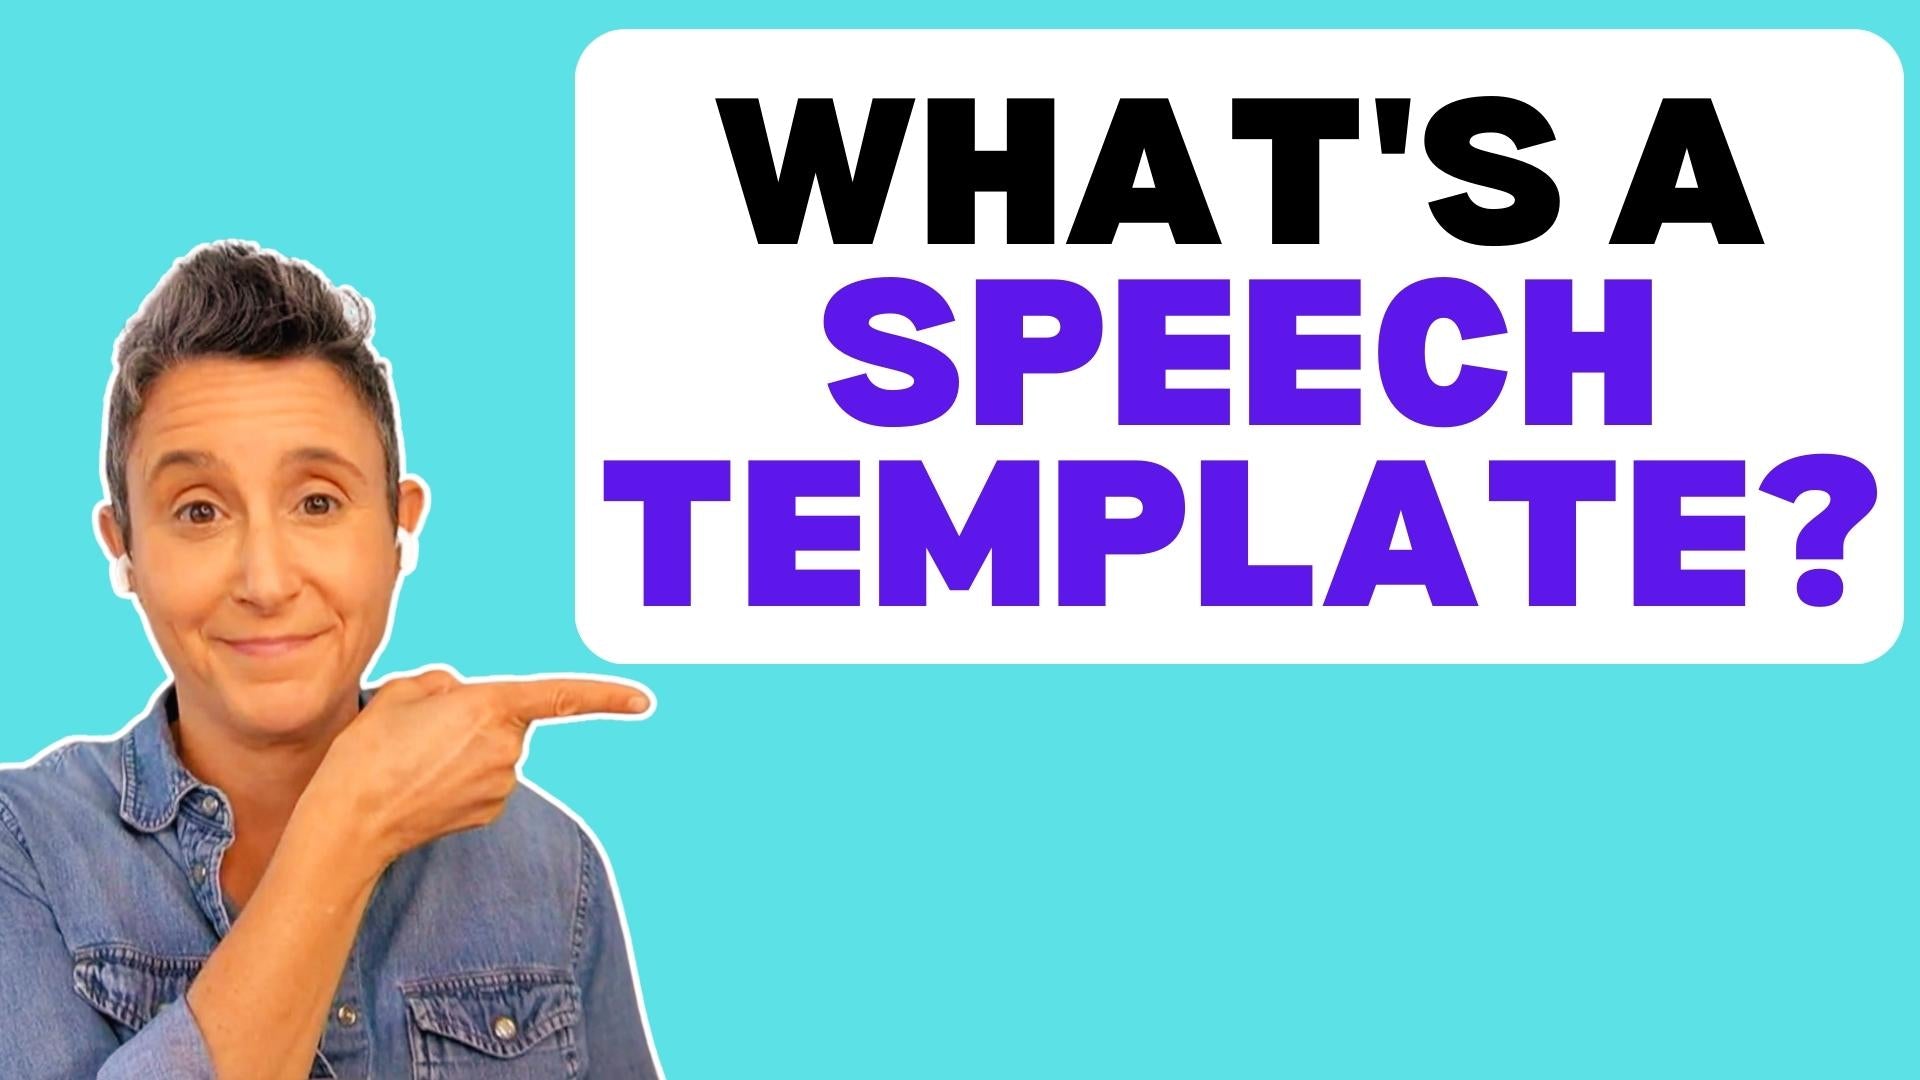 Load video: What is a speech template?